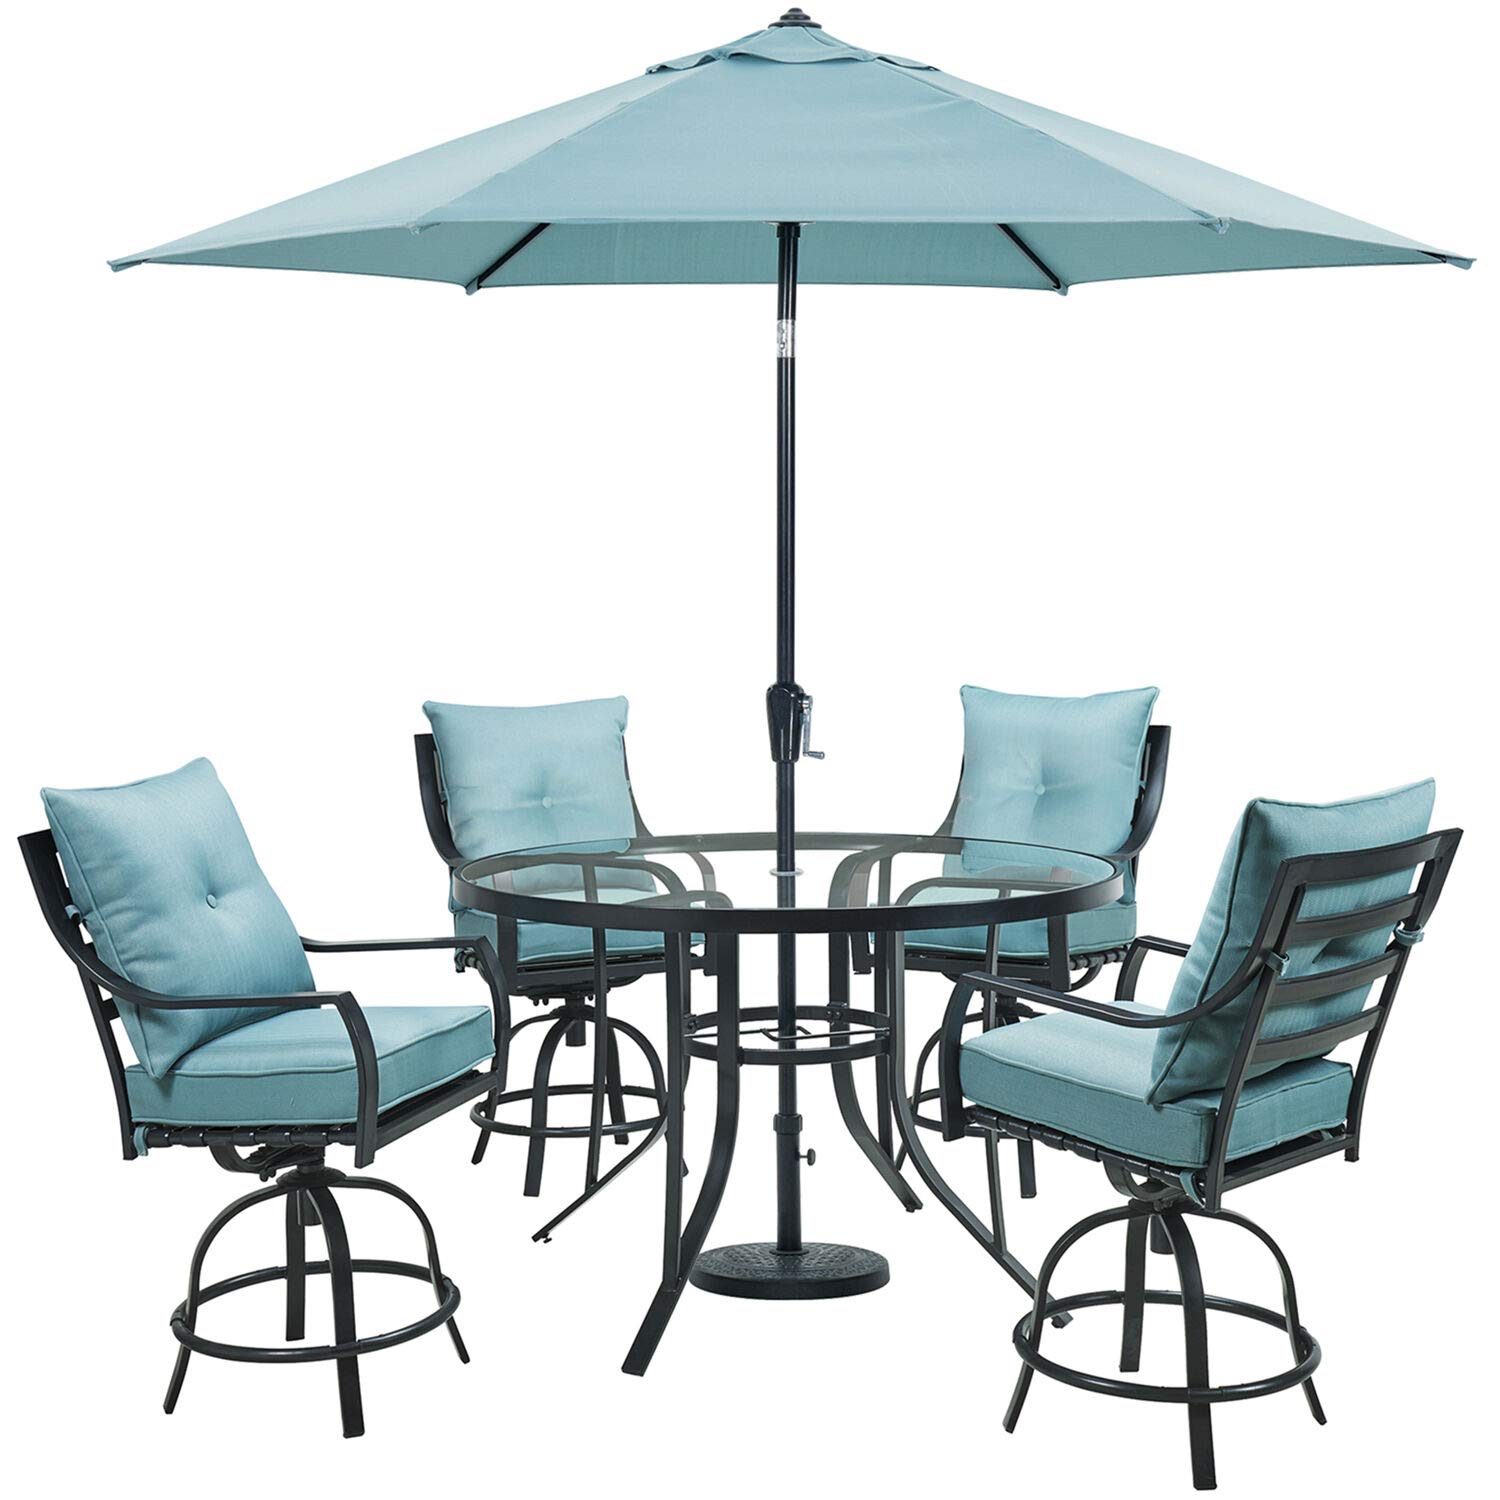 Hanover Lavallette 5-Piece Outdoor Dining Set with 9 ft. Umbrella | 4 Counter-Height Swivel Chairs | UV Protected Cushions | 52'' Round Glass-Top Table | Weather Resistant Frame | Ocean Blue